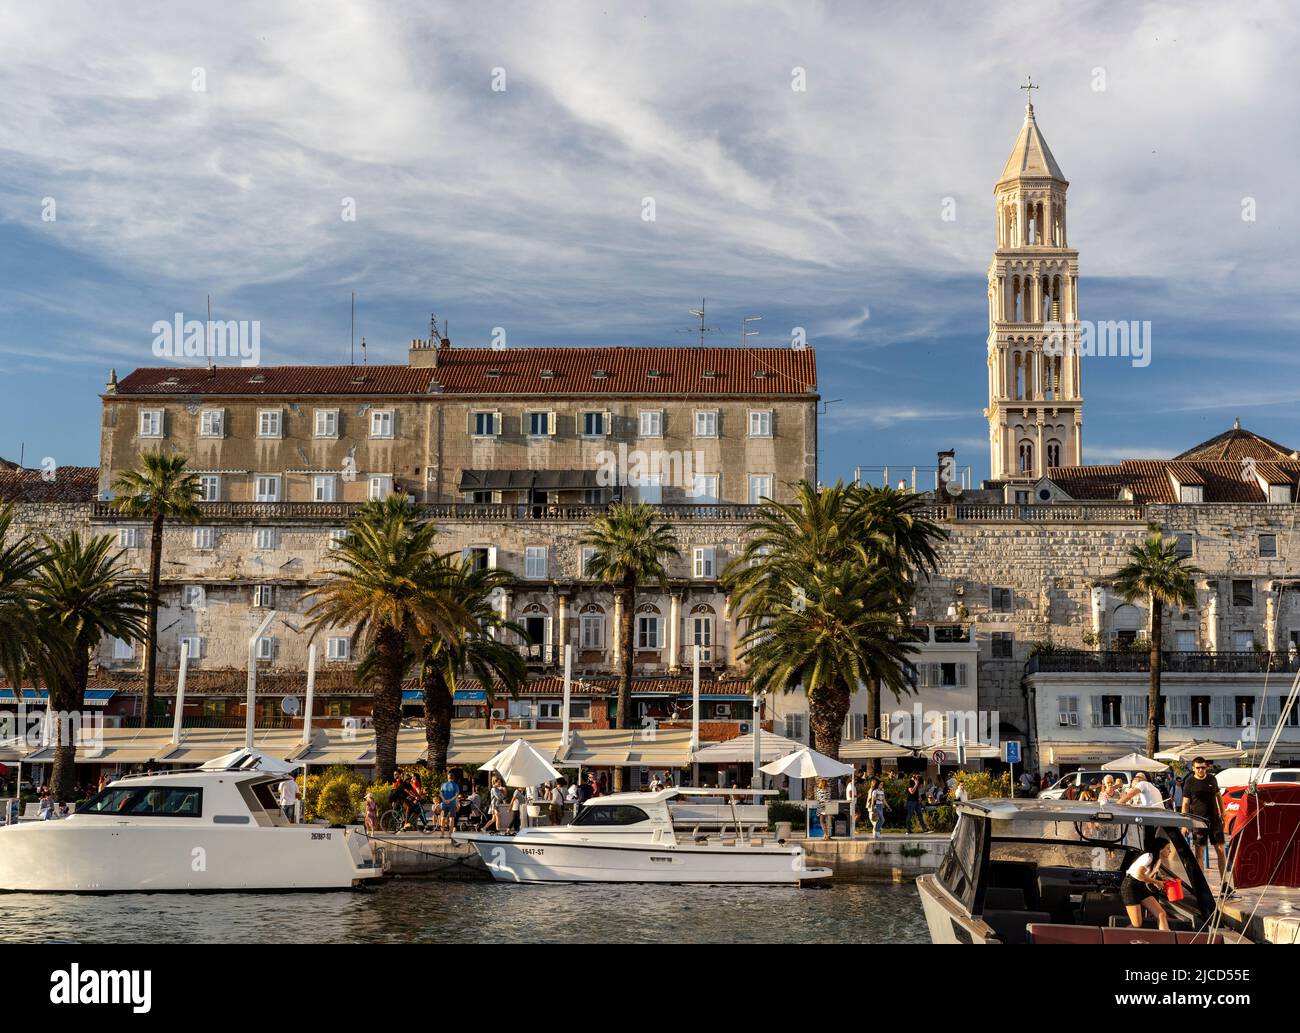 Waterfront Promenade (Riva) with Colonnade of Diocletian's Palace, Split, Croatia Stock Photo